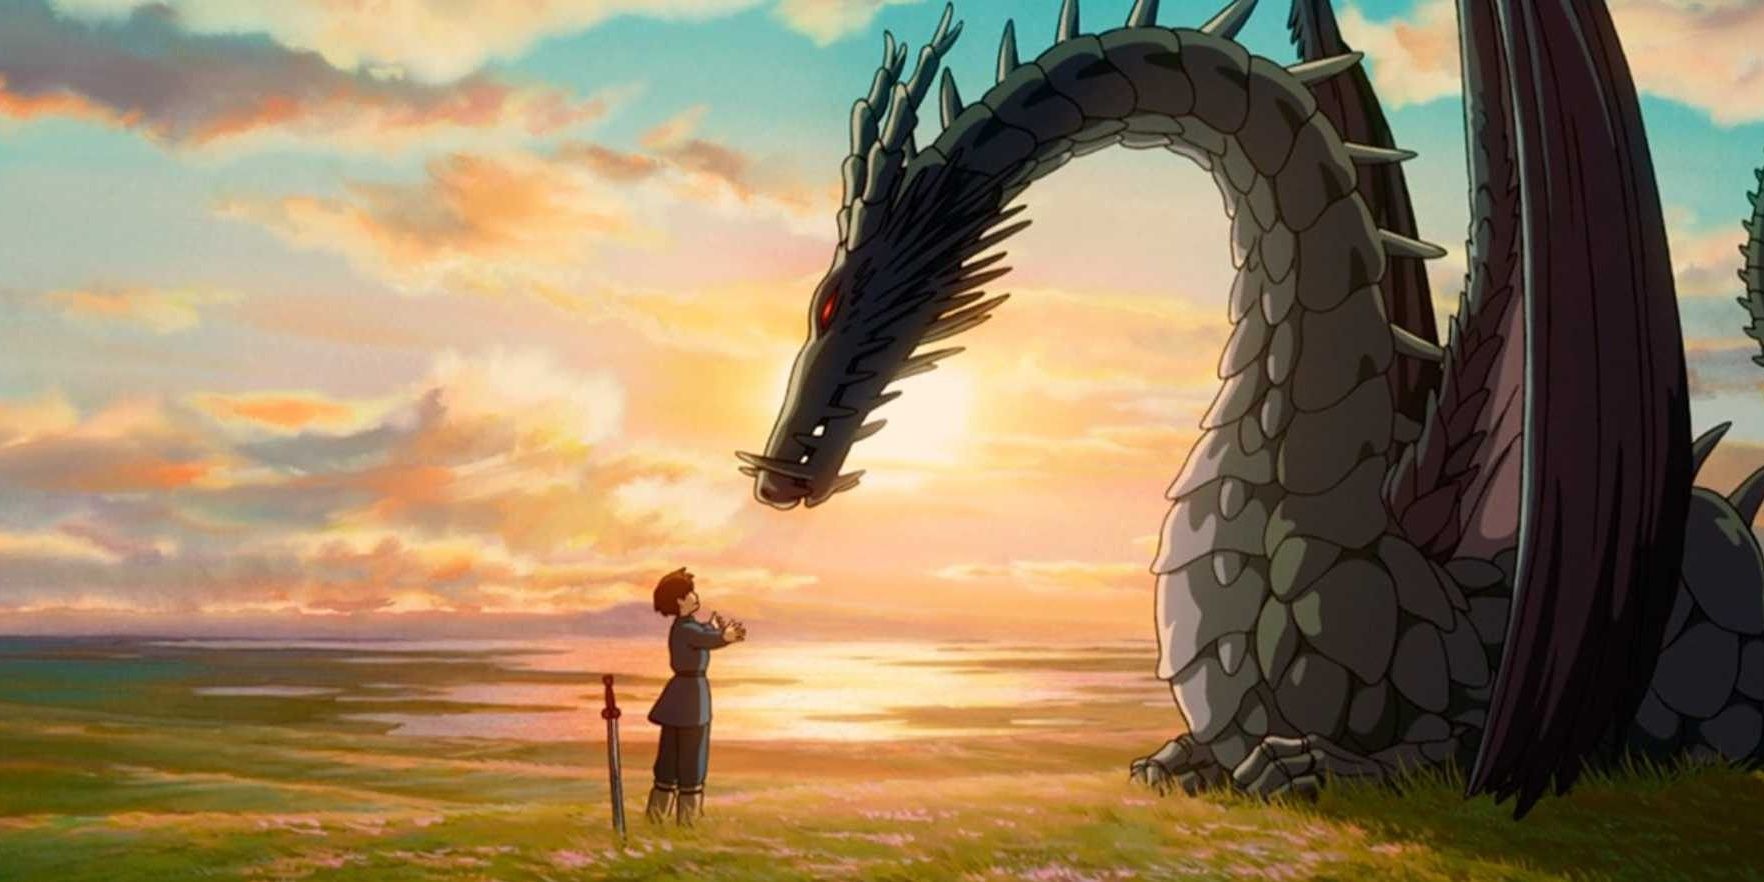 Studio Ghibli The 10 HighestGrossing Animations Of All Time